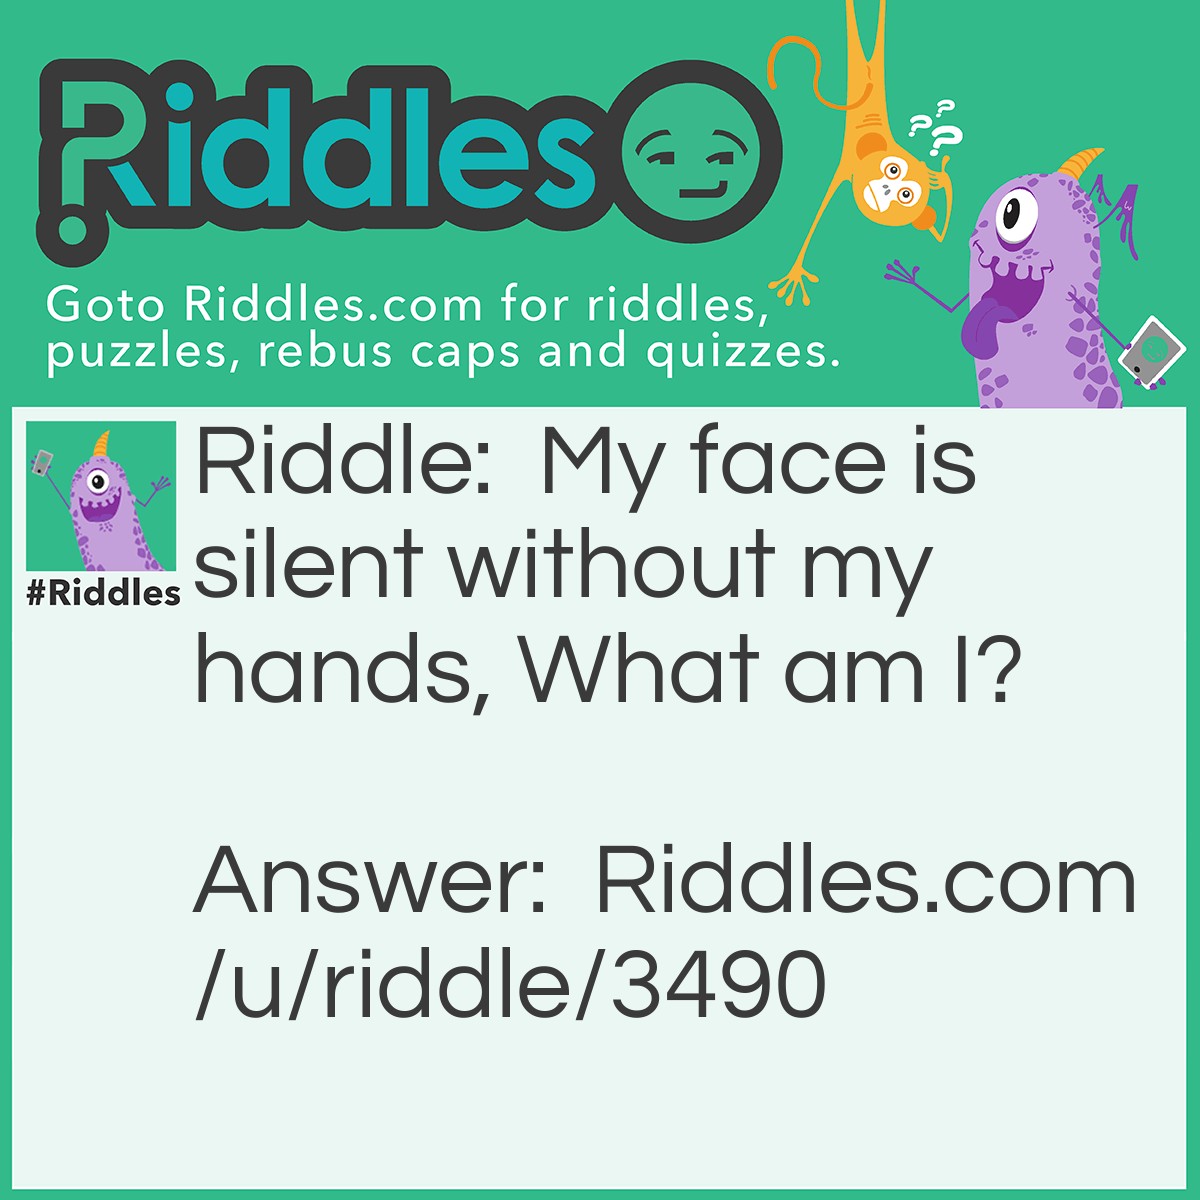 Riddle: My face is silent without my hands, What am I? Answer: A clock.